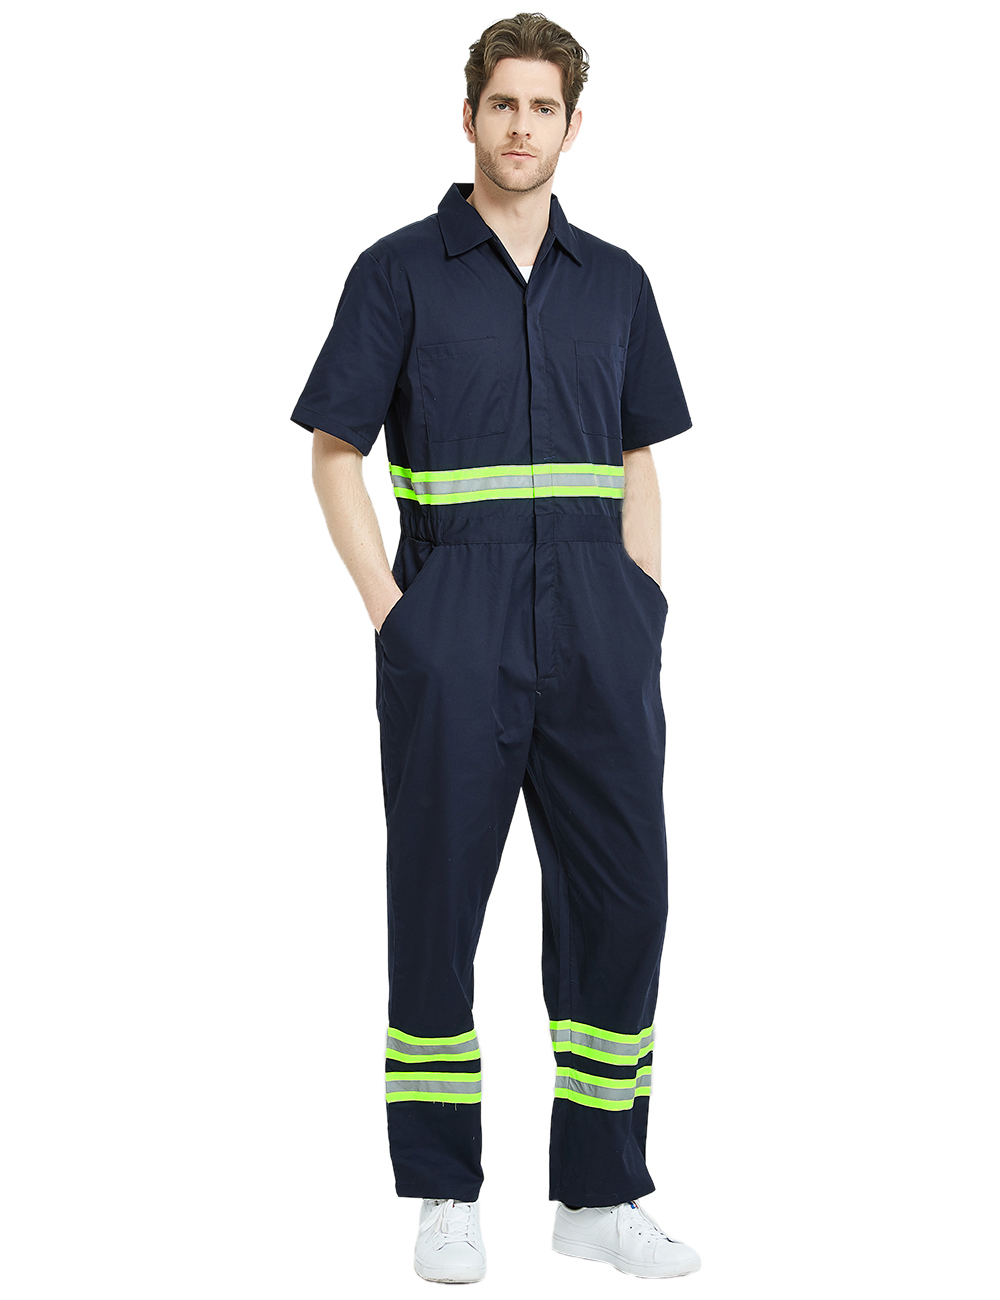 Mens One-piece Safety Reflective Tape Overall Boilersuit work jumpsuit Coveralls 